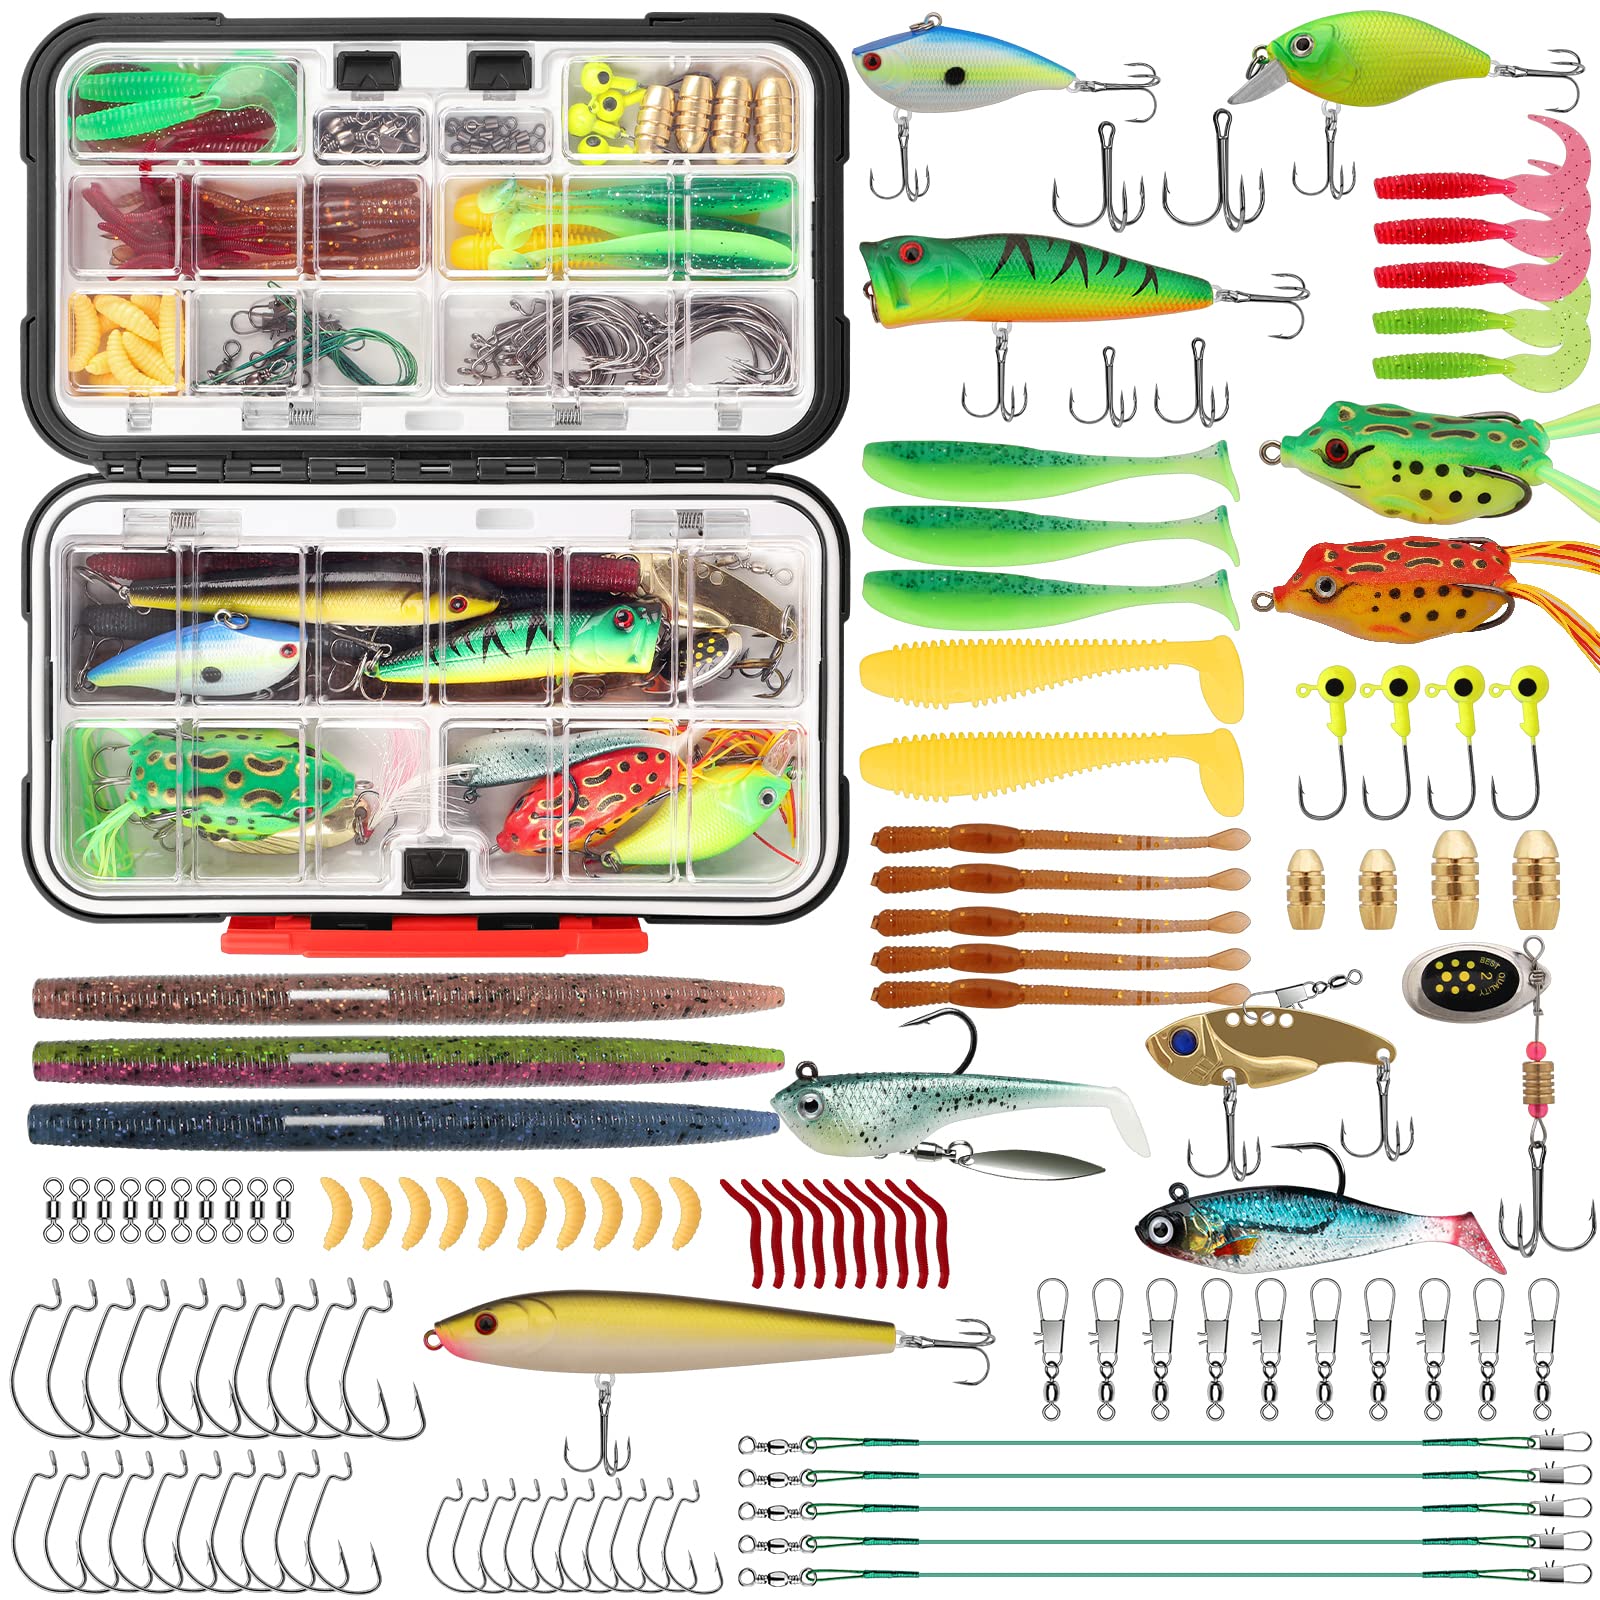 Fishing Tools, Tackle, Accessories, Make Fishing Easy